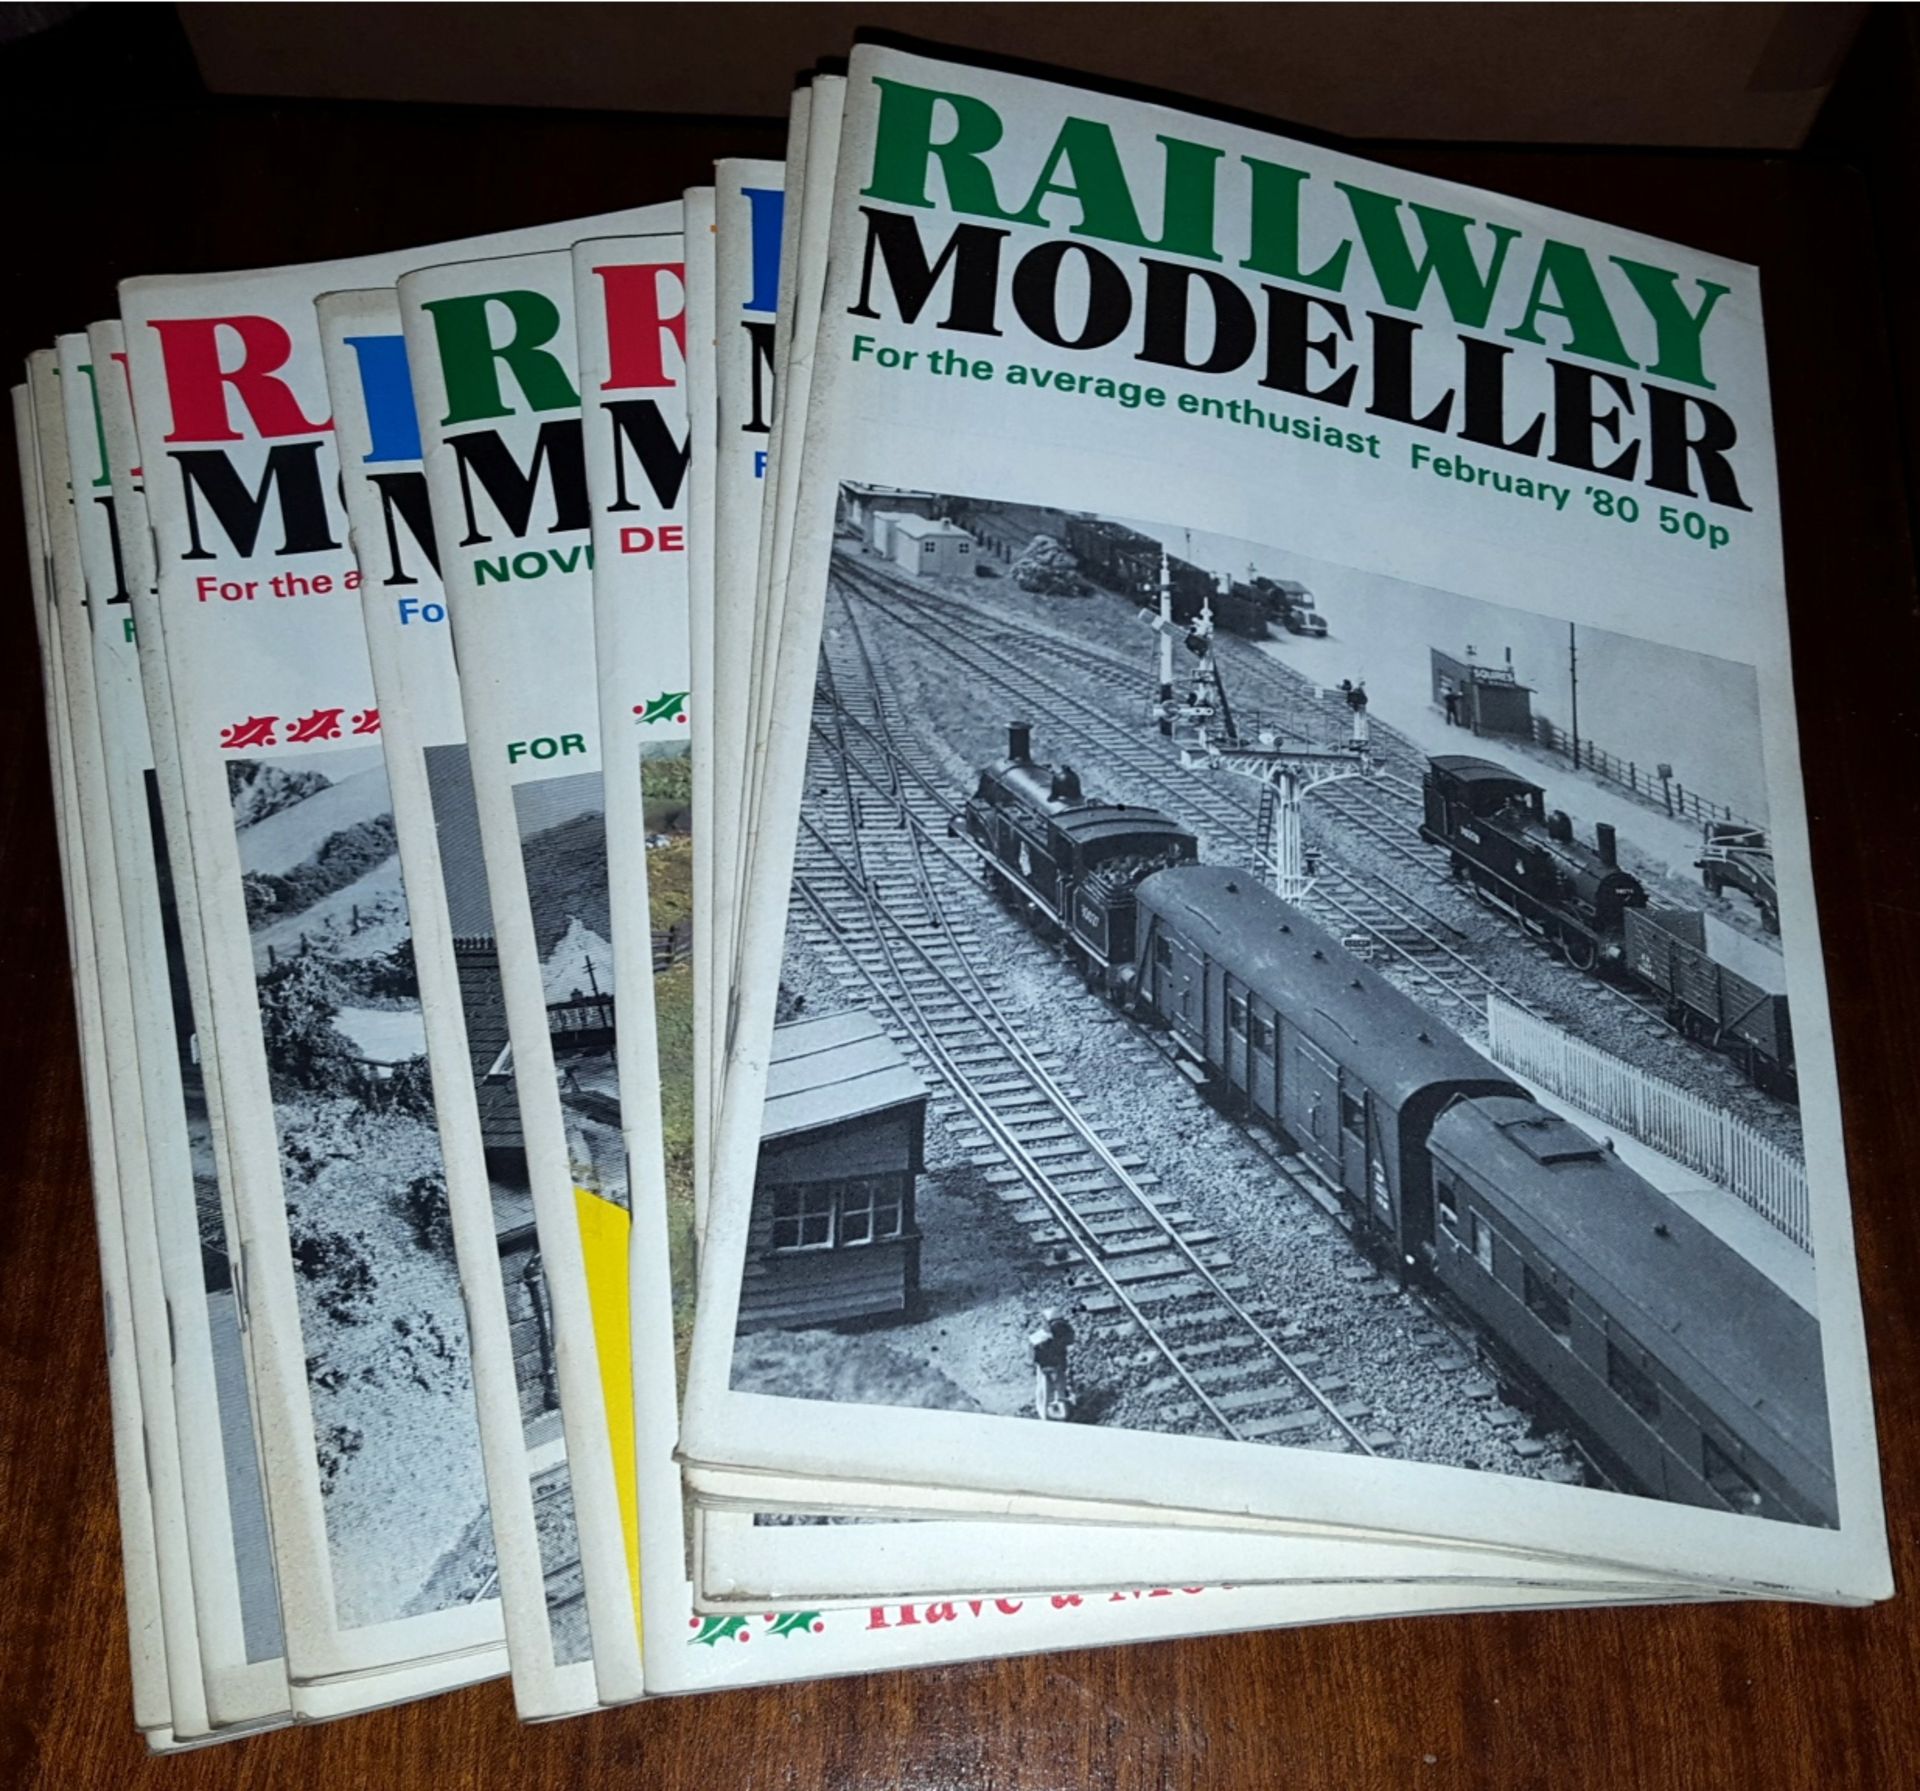 38 x Collectable Railway Magazines 'Railway Modeller' 1962, 1975 & 1980 NO RESERVE - Image 4 of 5